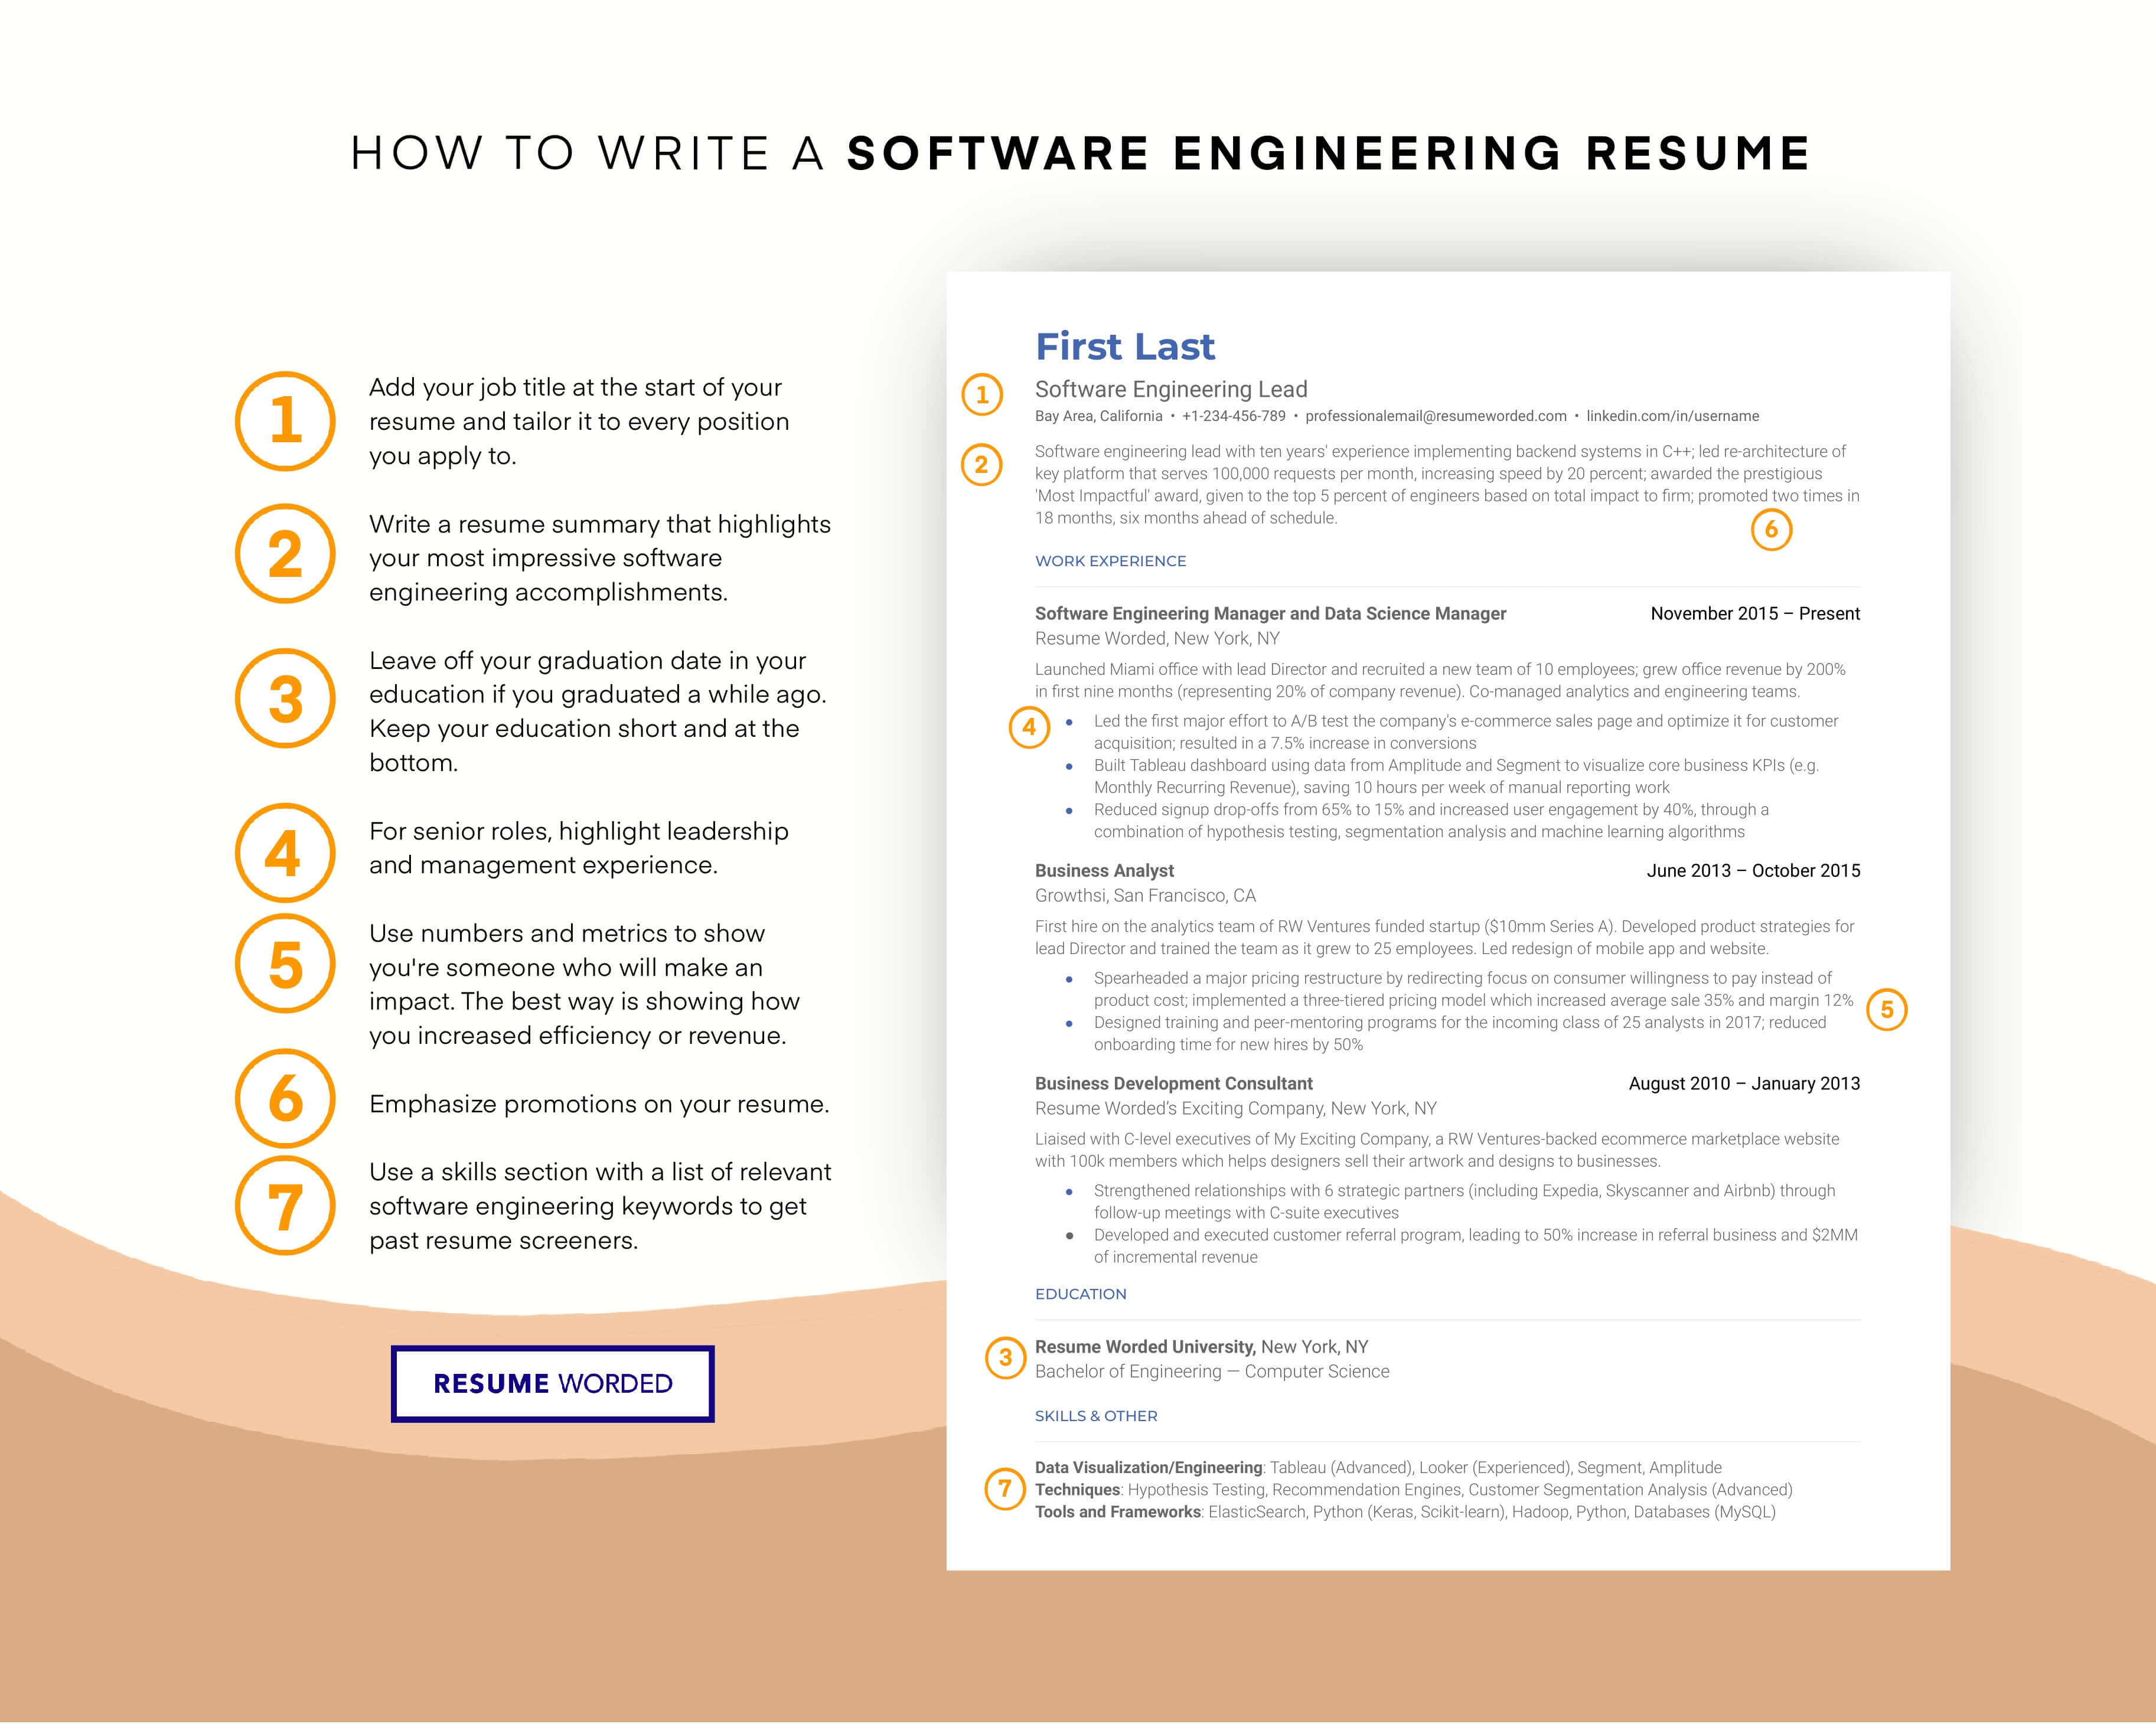 Include your software and hardware tools. - Remote Customer Service Rep Resume